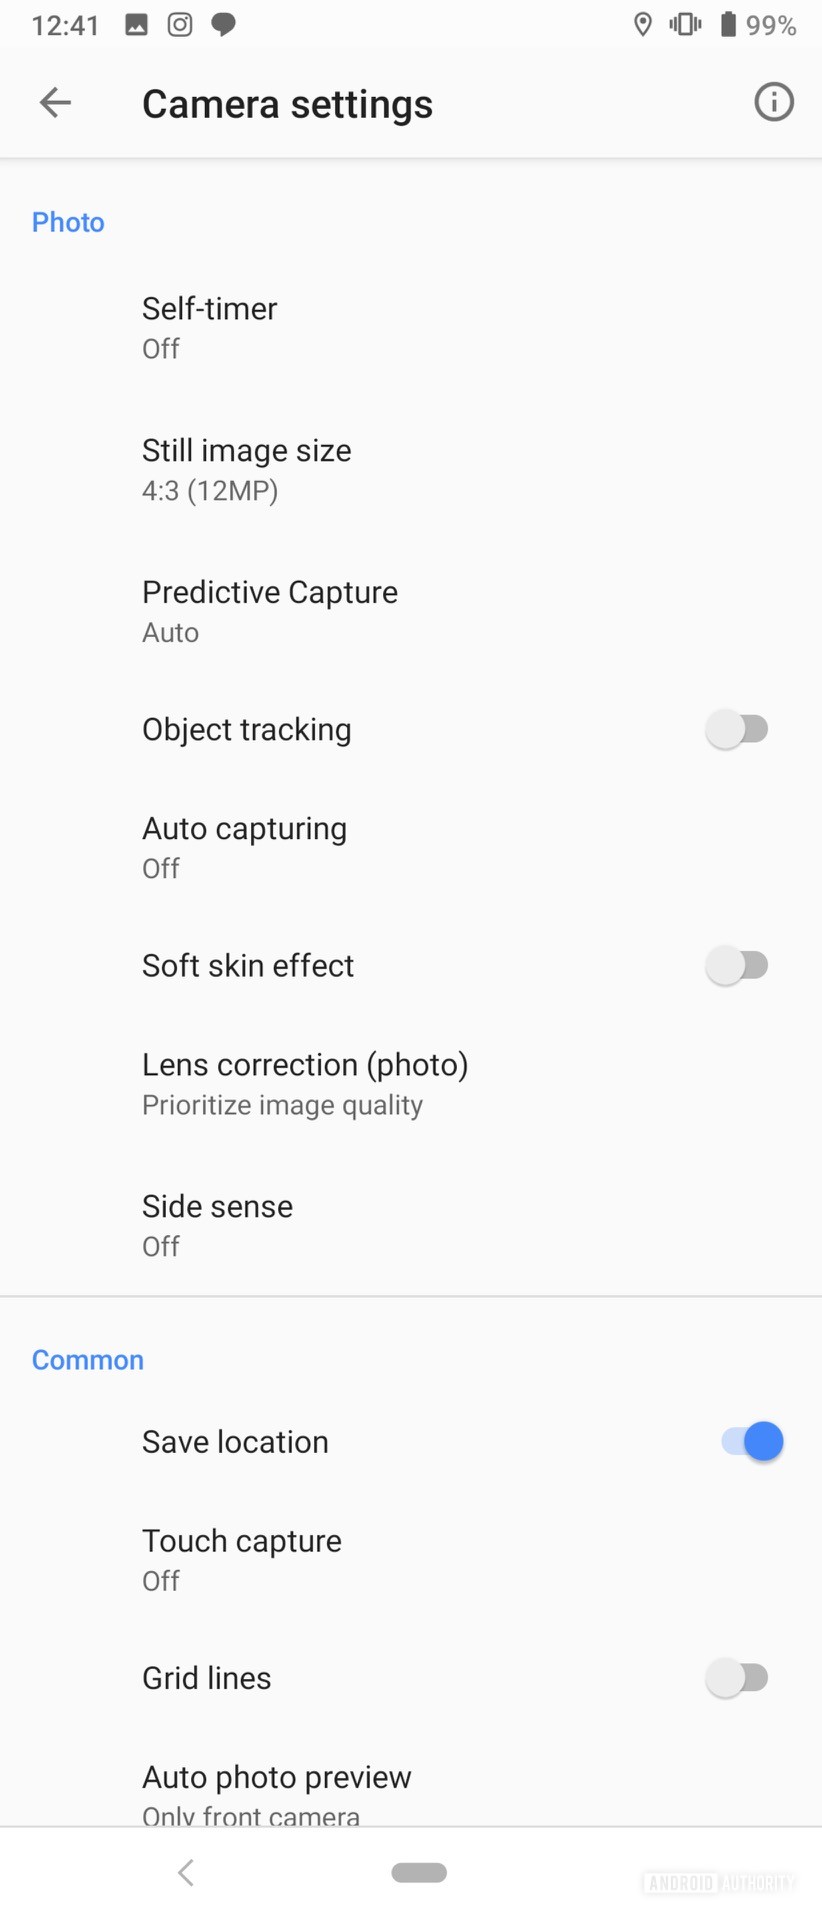 Sony Xperia 1 Review campera app settings